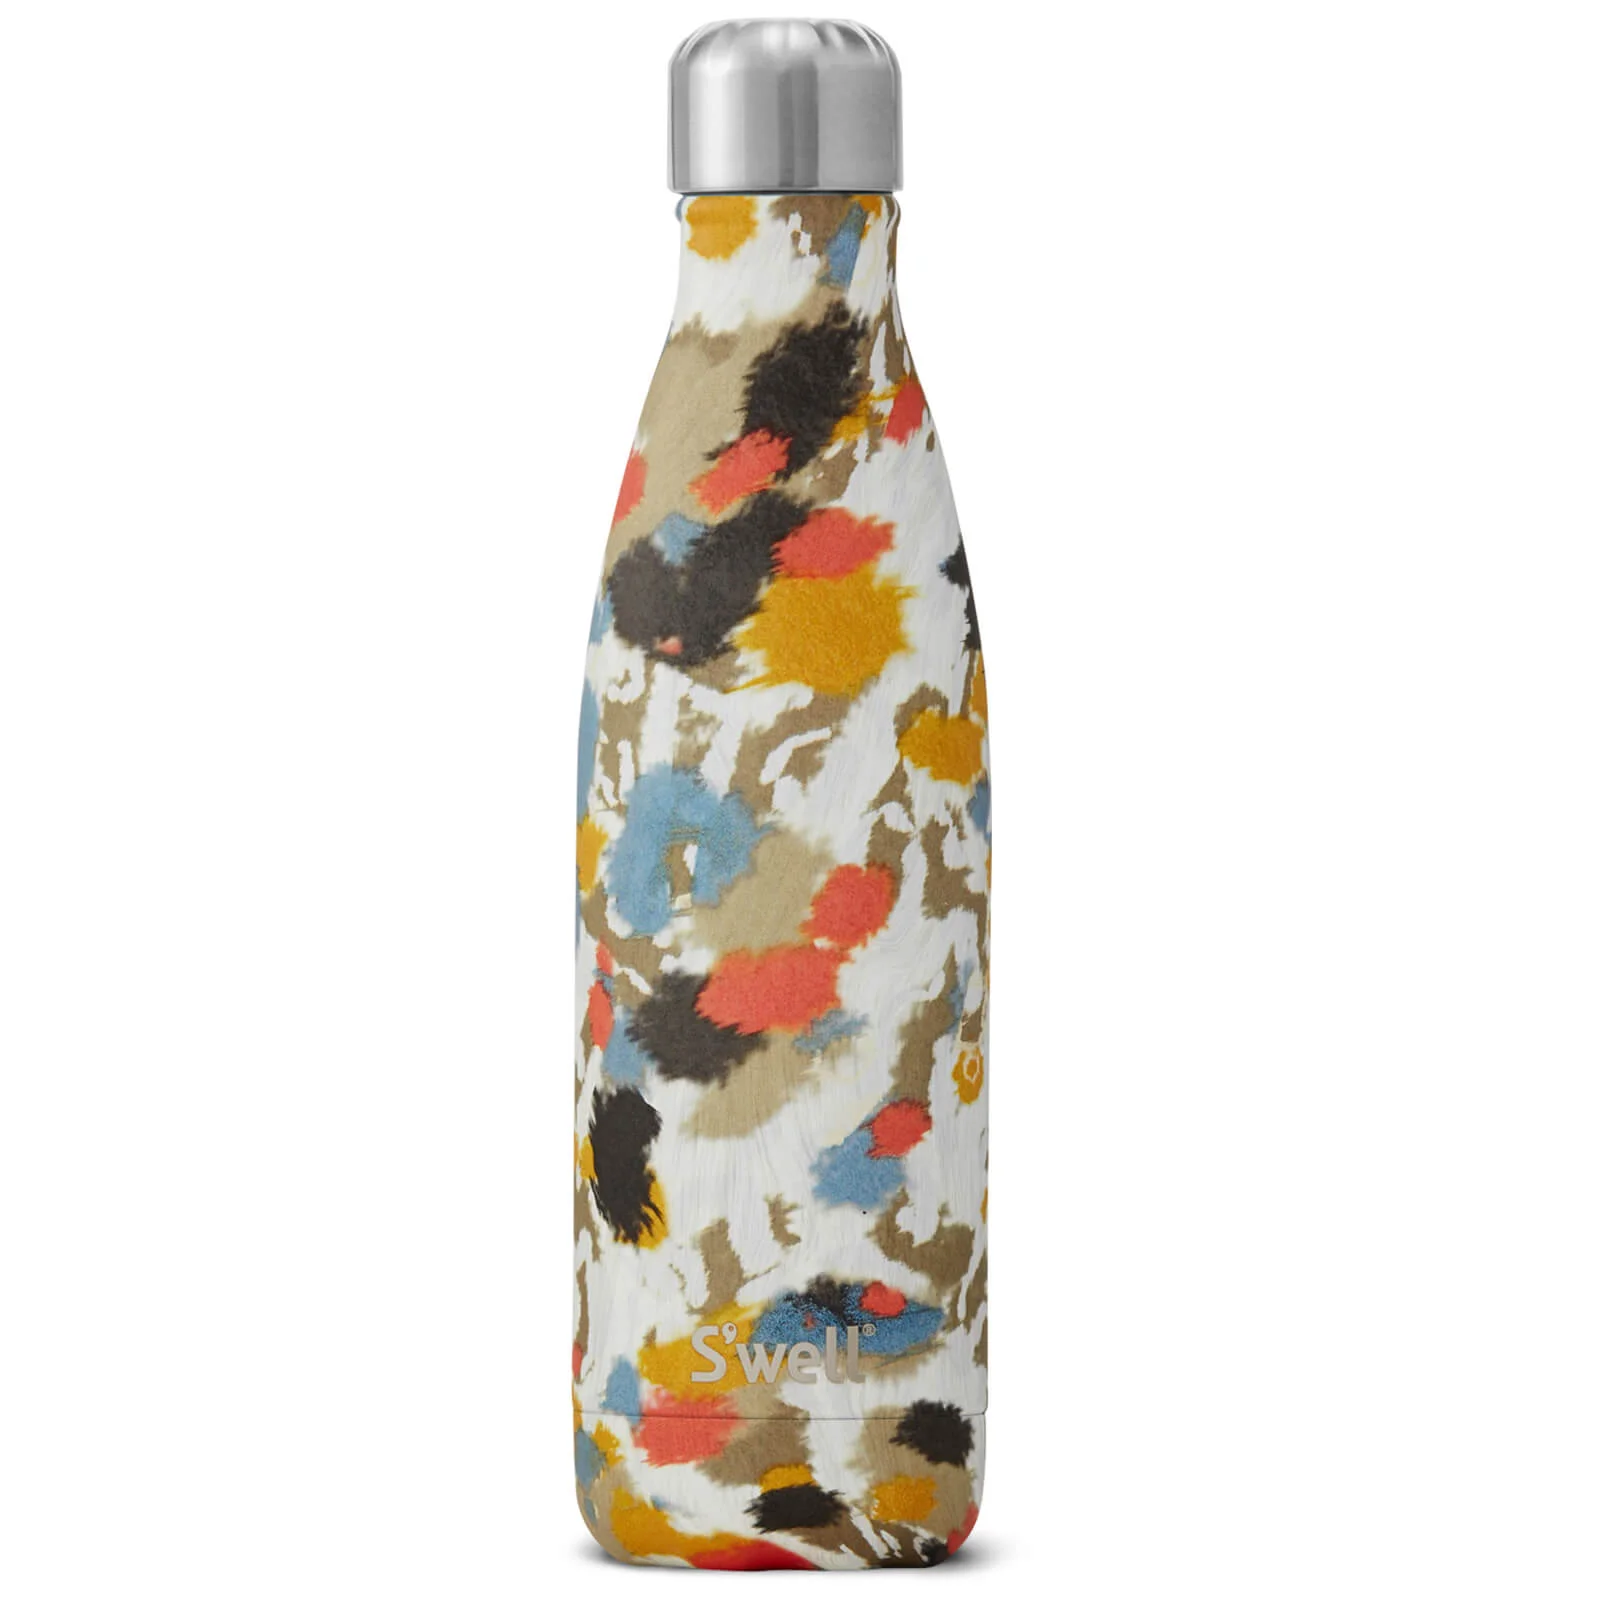 S'well Ivoire Cheetah Water Bottle 500ml Image 1